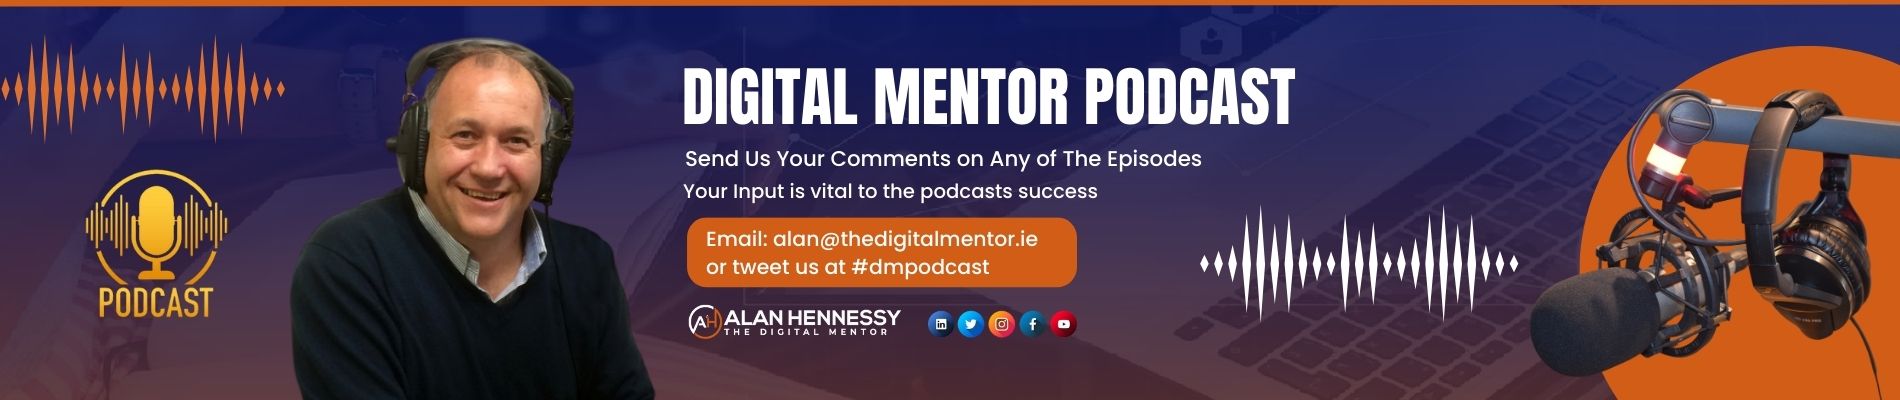 The Digital Mentor Podcast Your Input is vital to the success of the Podcast